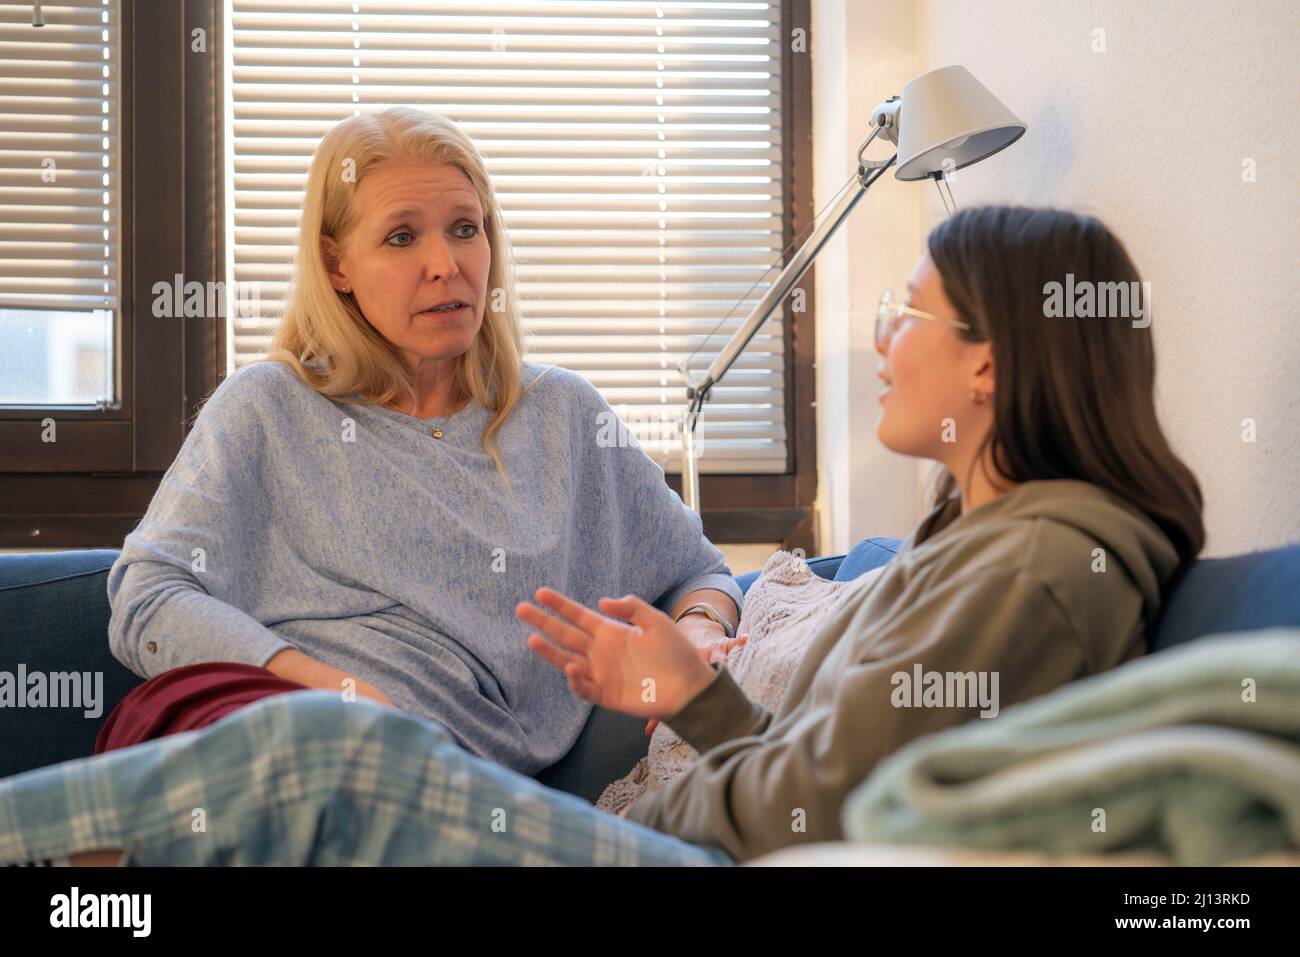 Mother and daughter, teenage, 13 years old, in confidential conversation, at home, Stock Photo